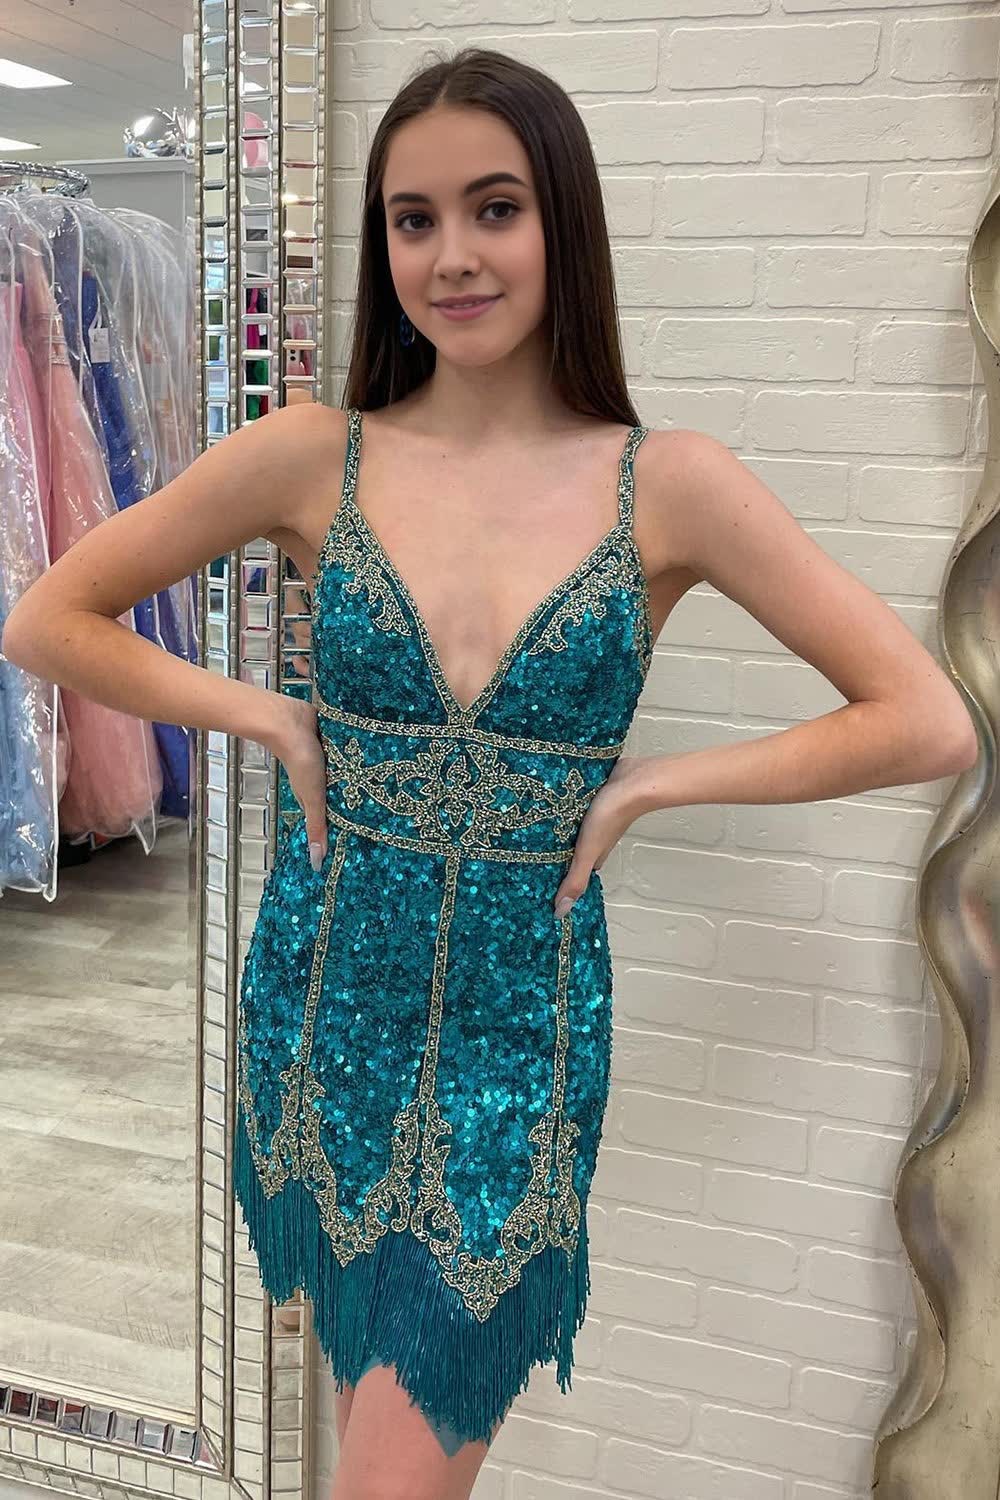 Turquoise Sequined Corset Homecoming Dress With Fringes outfit, Turquoise Sequined Homecoming Dress With Fringes